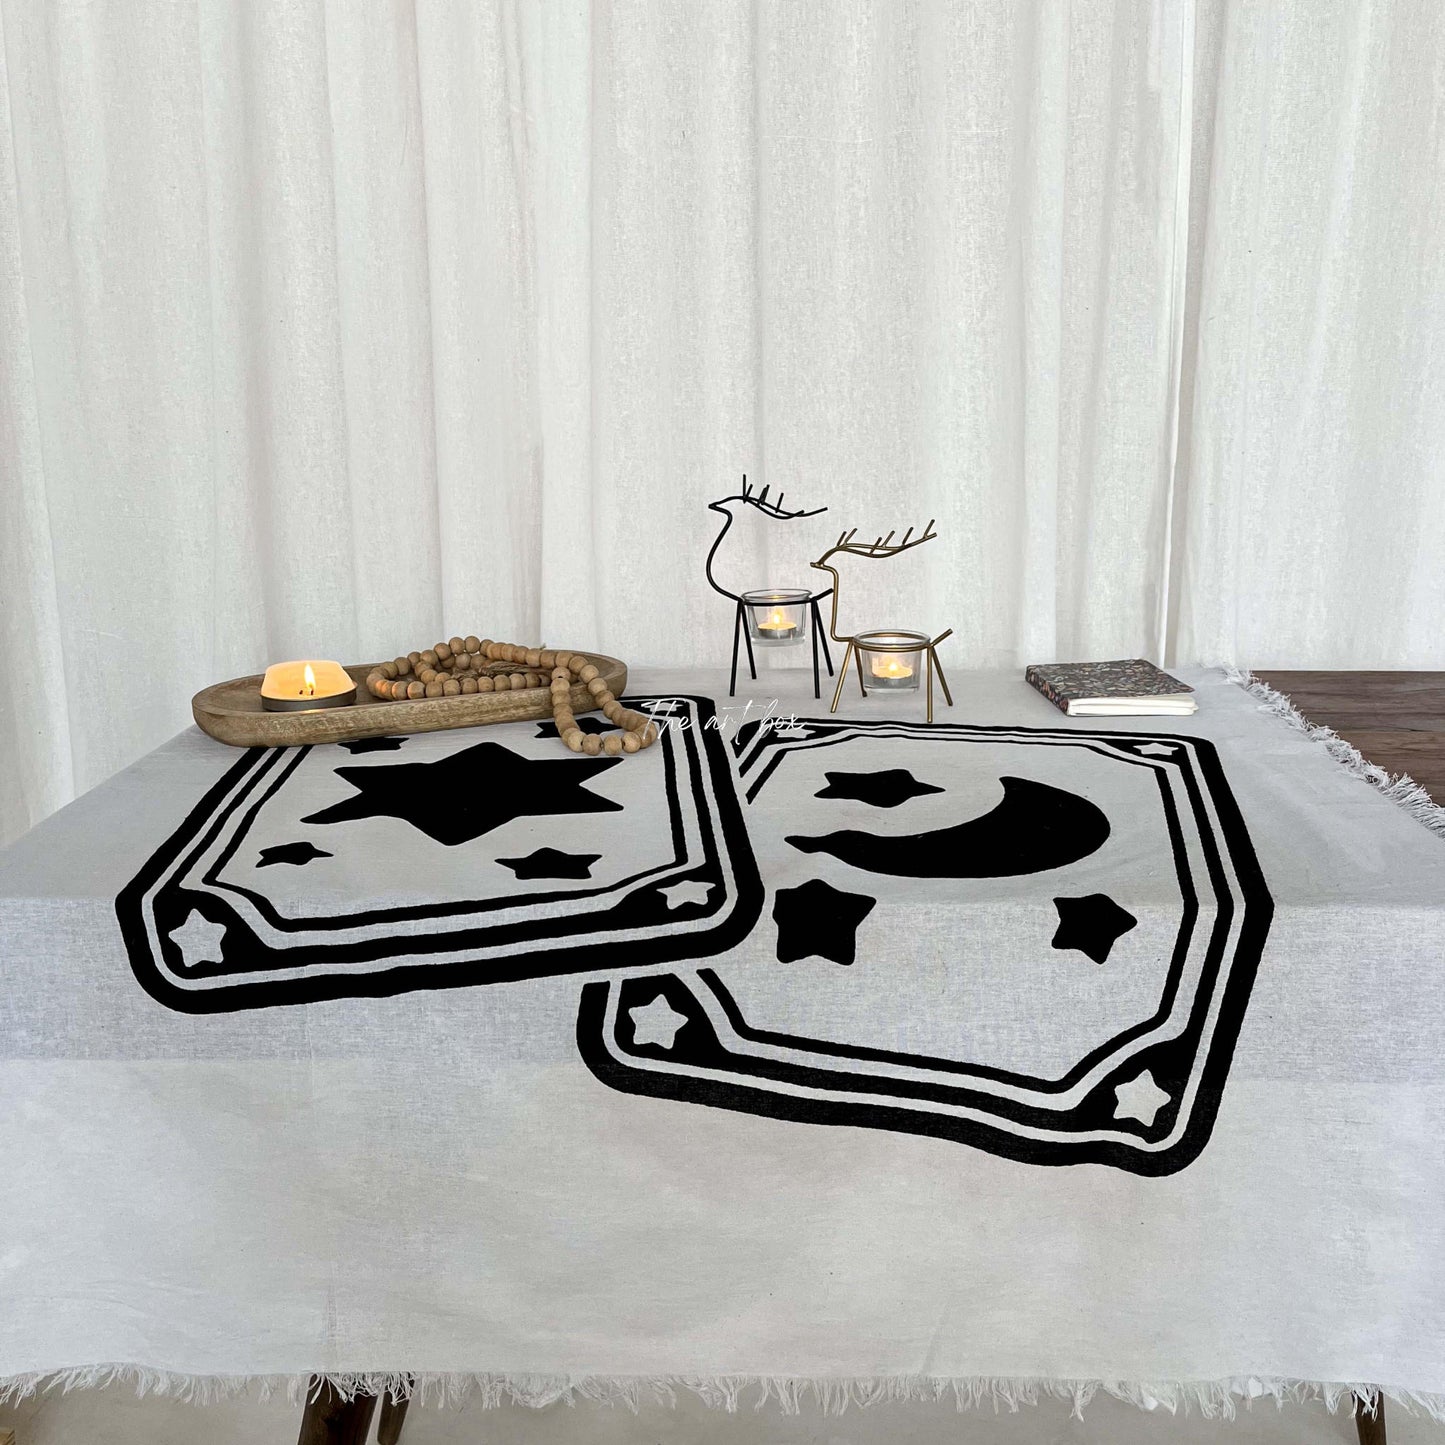 White Printed Altar Table Cloth Tarot Mat Witchcraft Supplies